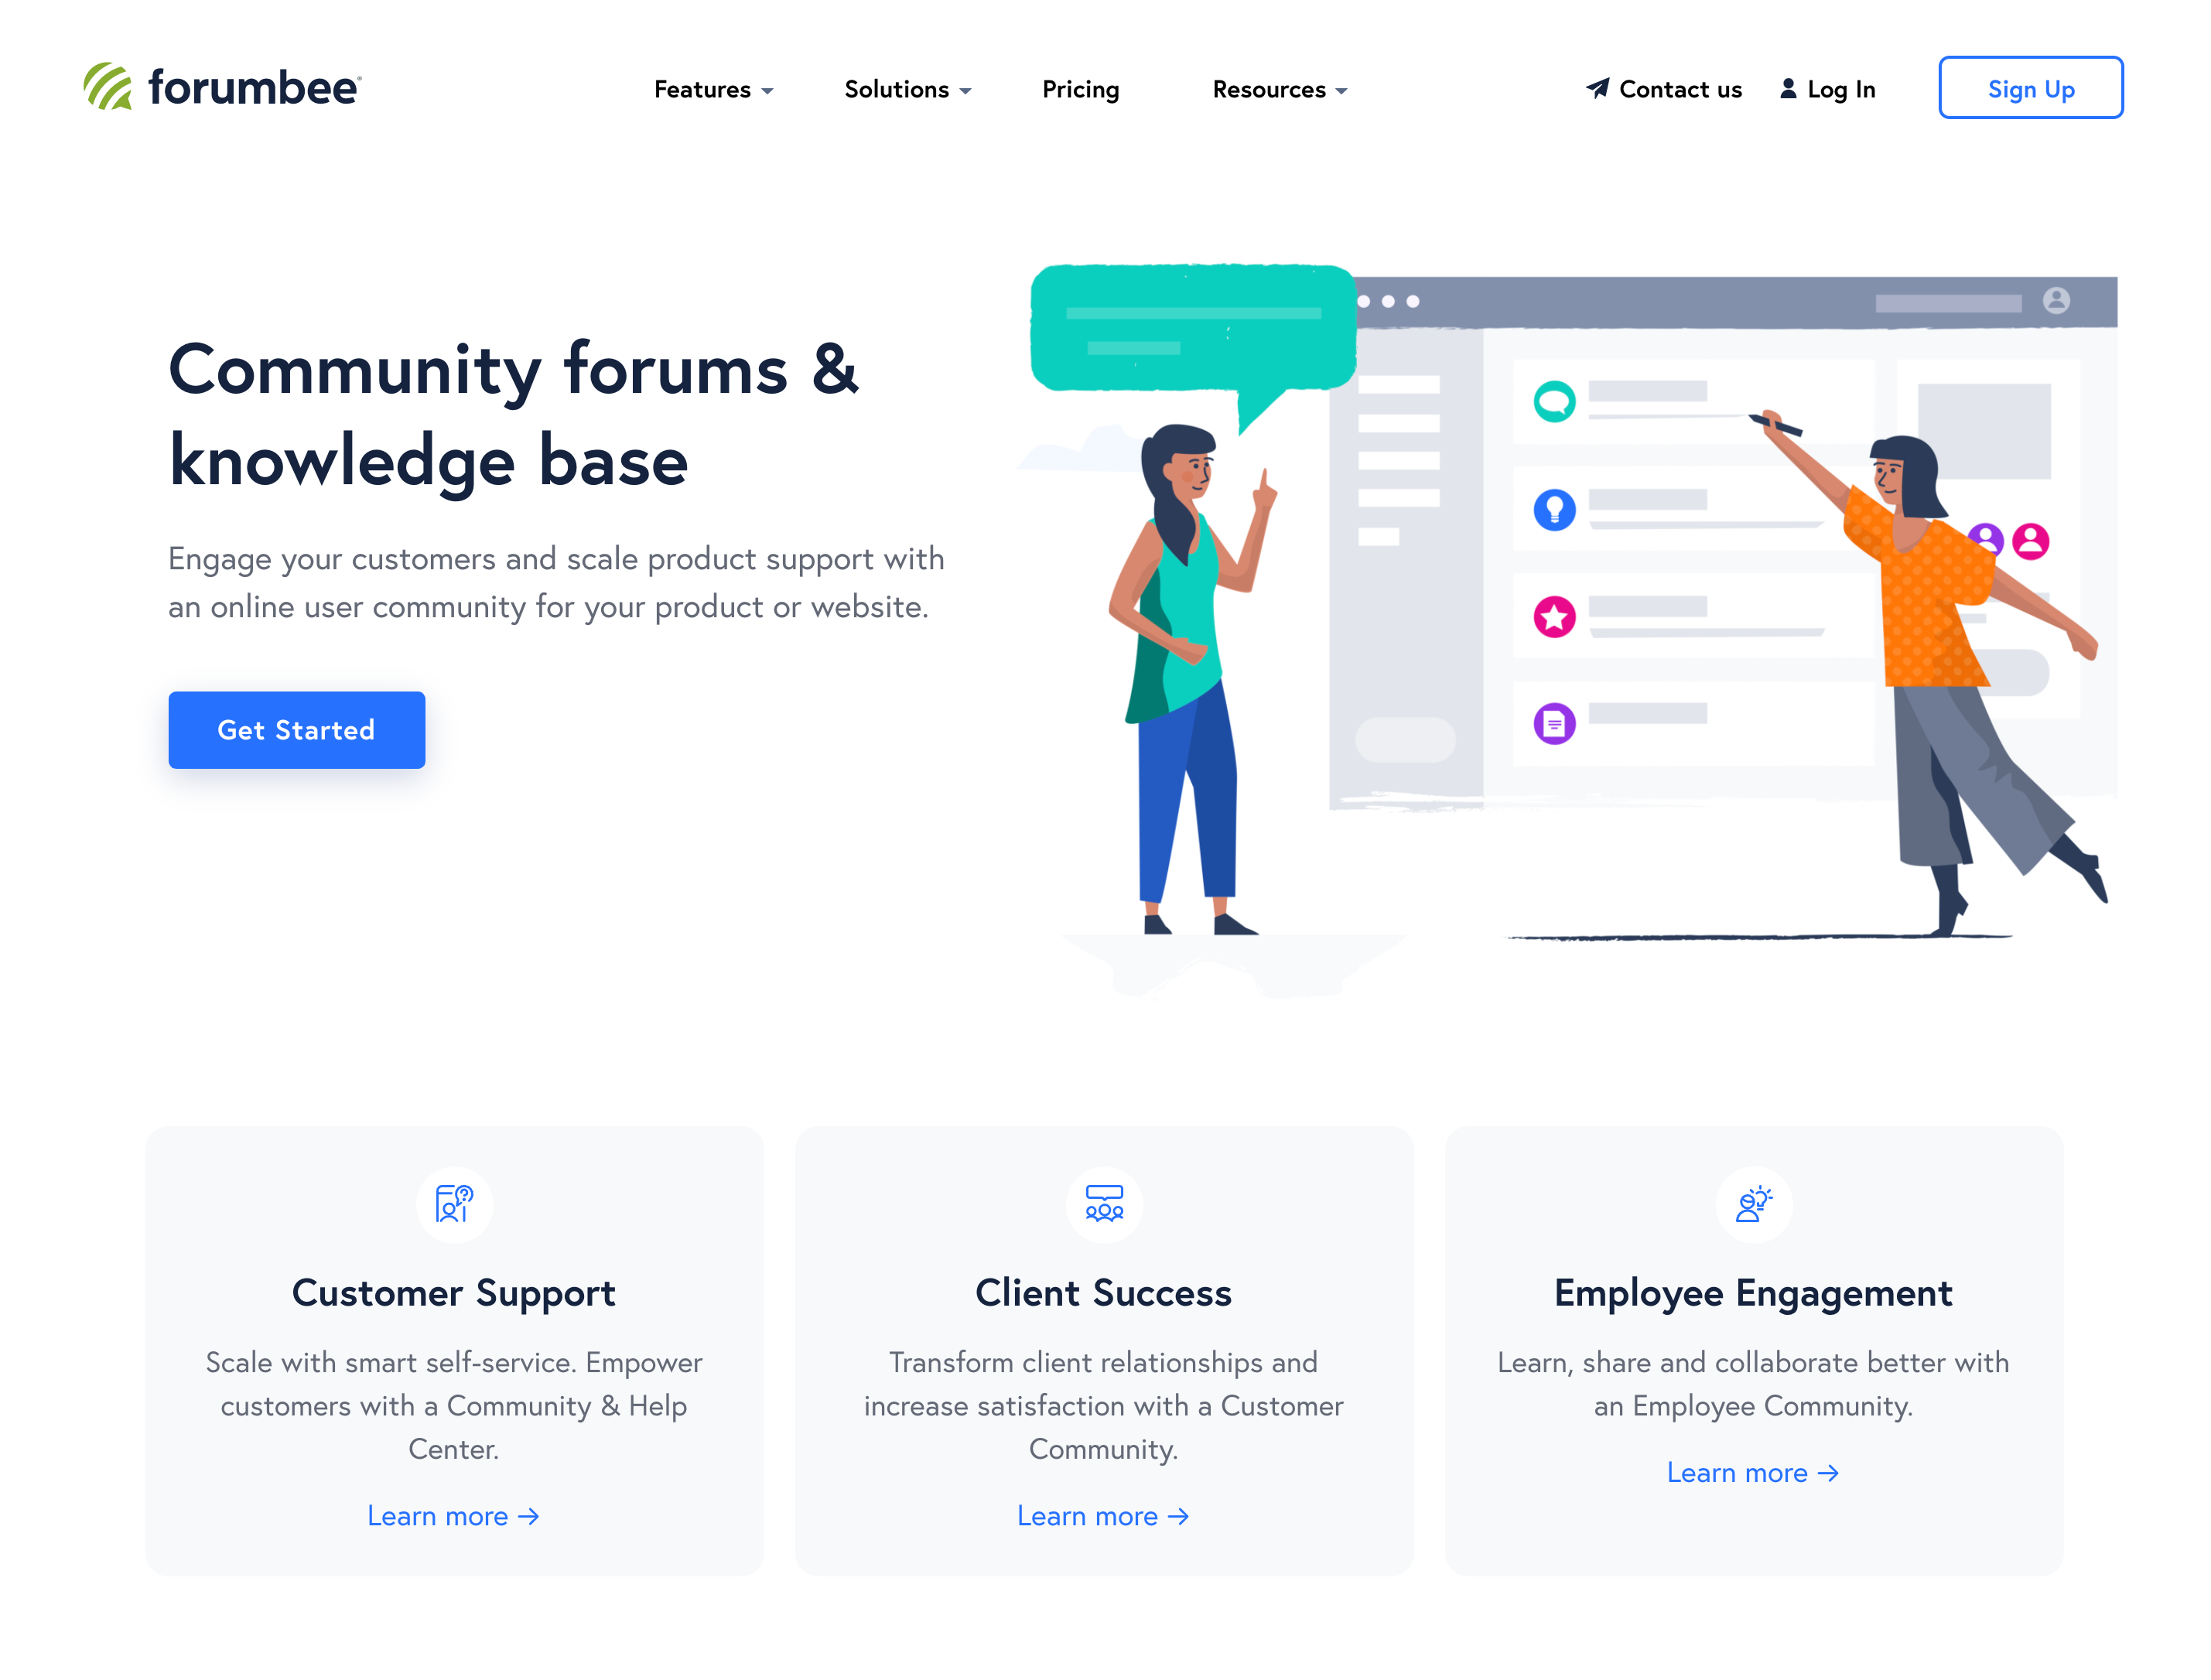 Use Forumbee to create a community and knowledge base hub for your customers, clients, and employees